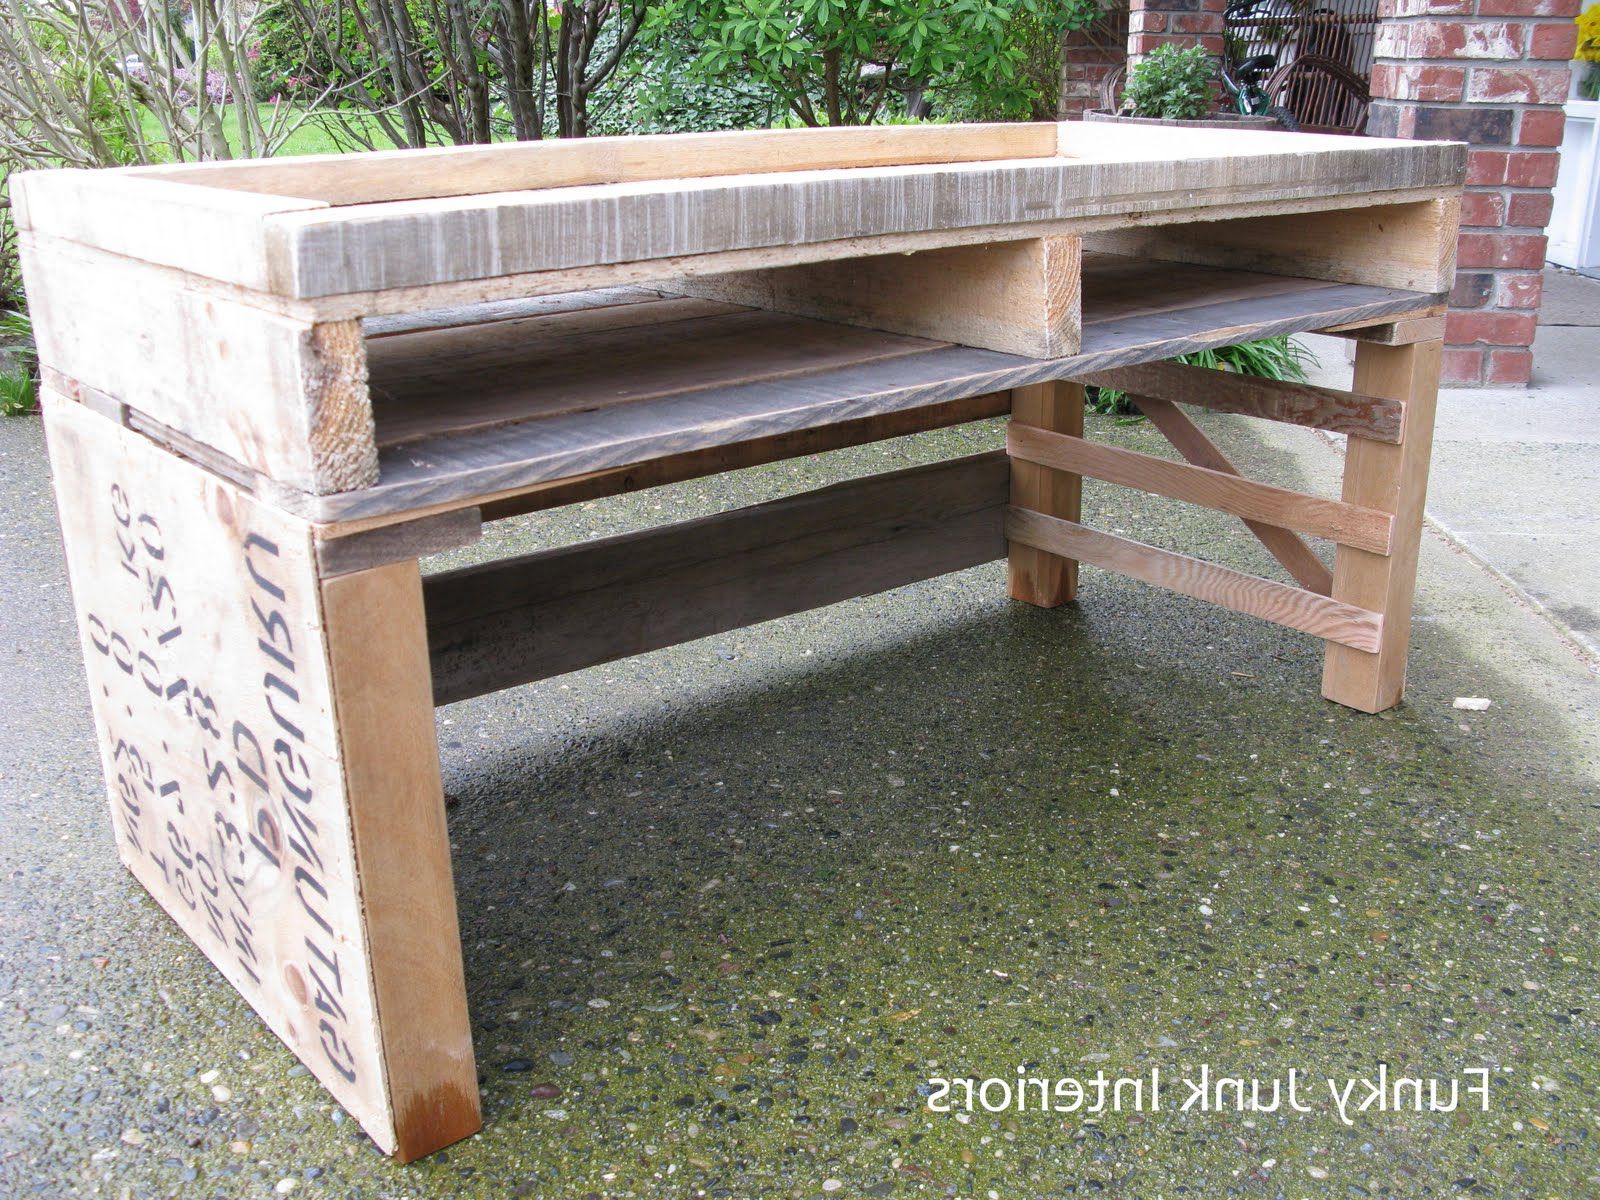 Fashionable Funky Tv Stands Regarding New Tv Stand Made From A Palletfunky Junk Interiors (View 13 of 20)